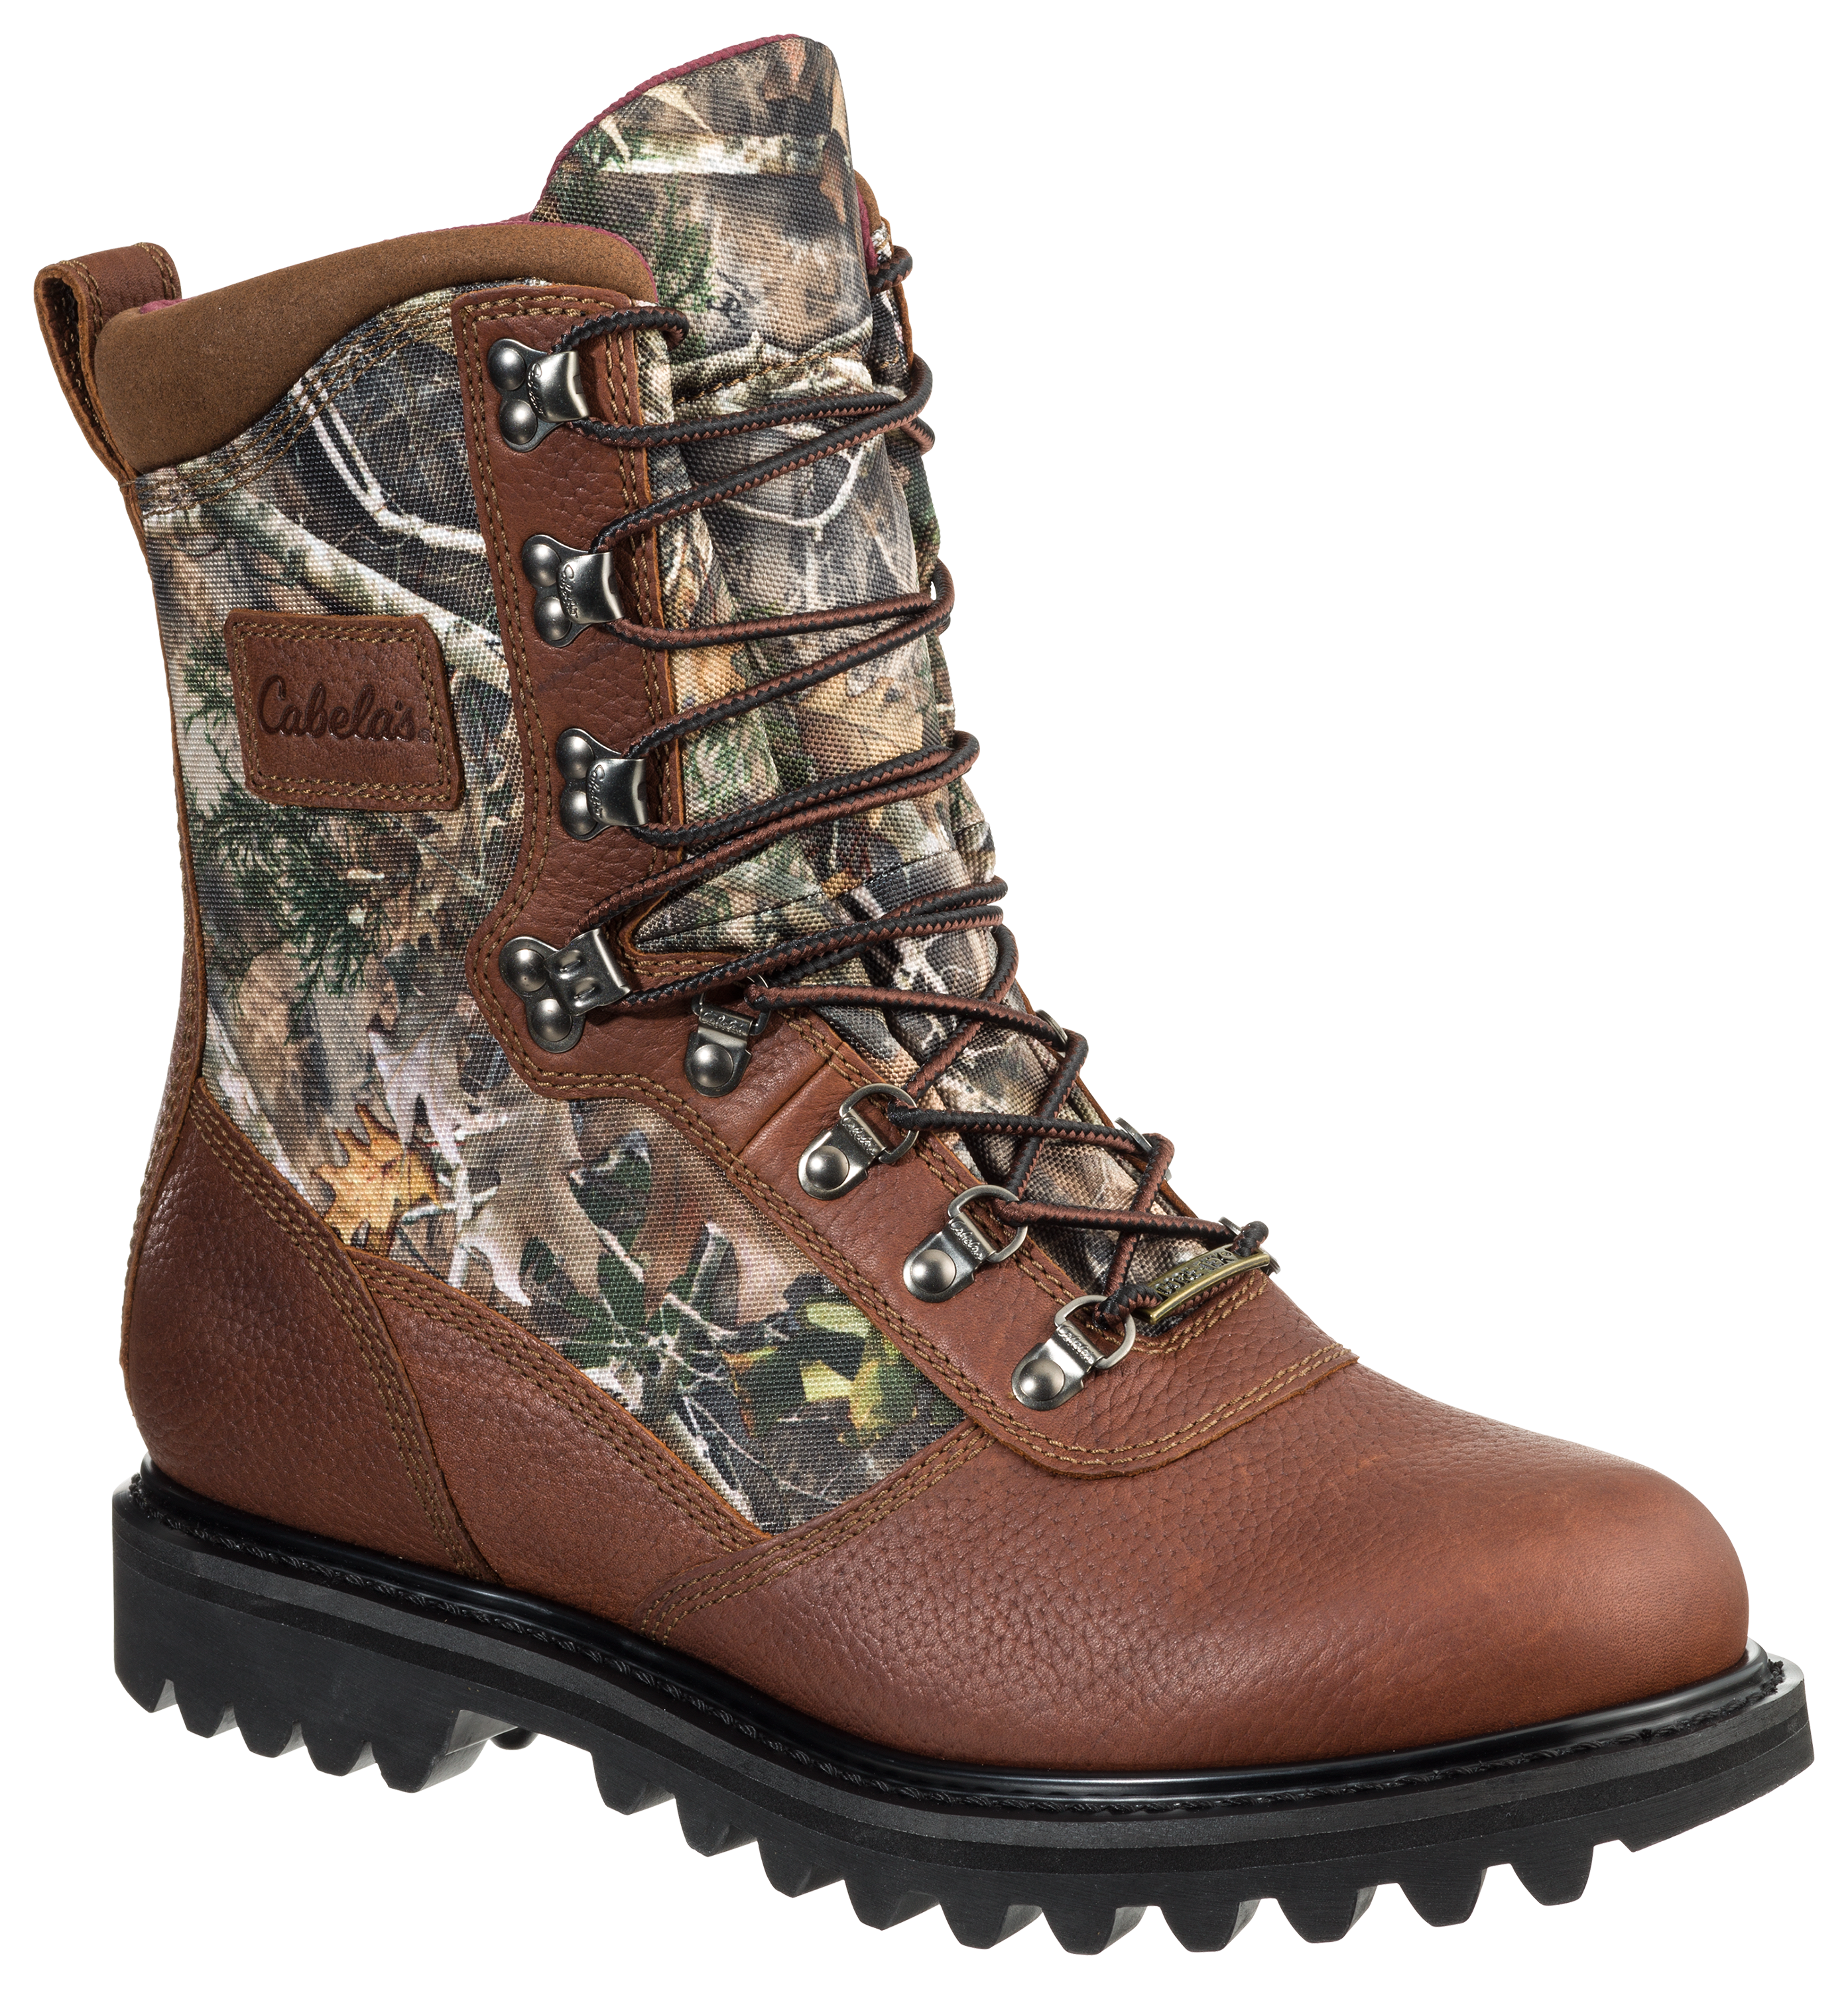 Cabelas Cabelas Thinsulate Ultra Boots 9 1/2 EE   81-3739 New 